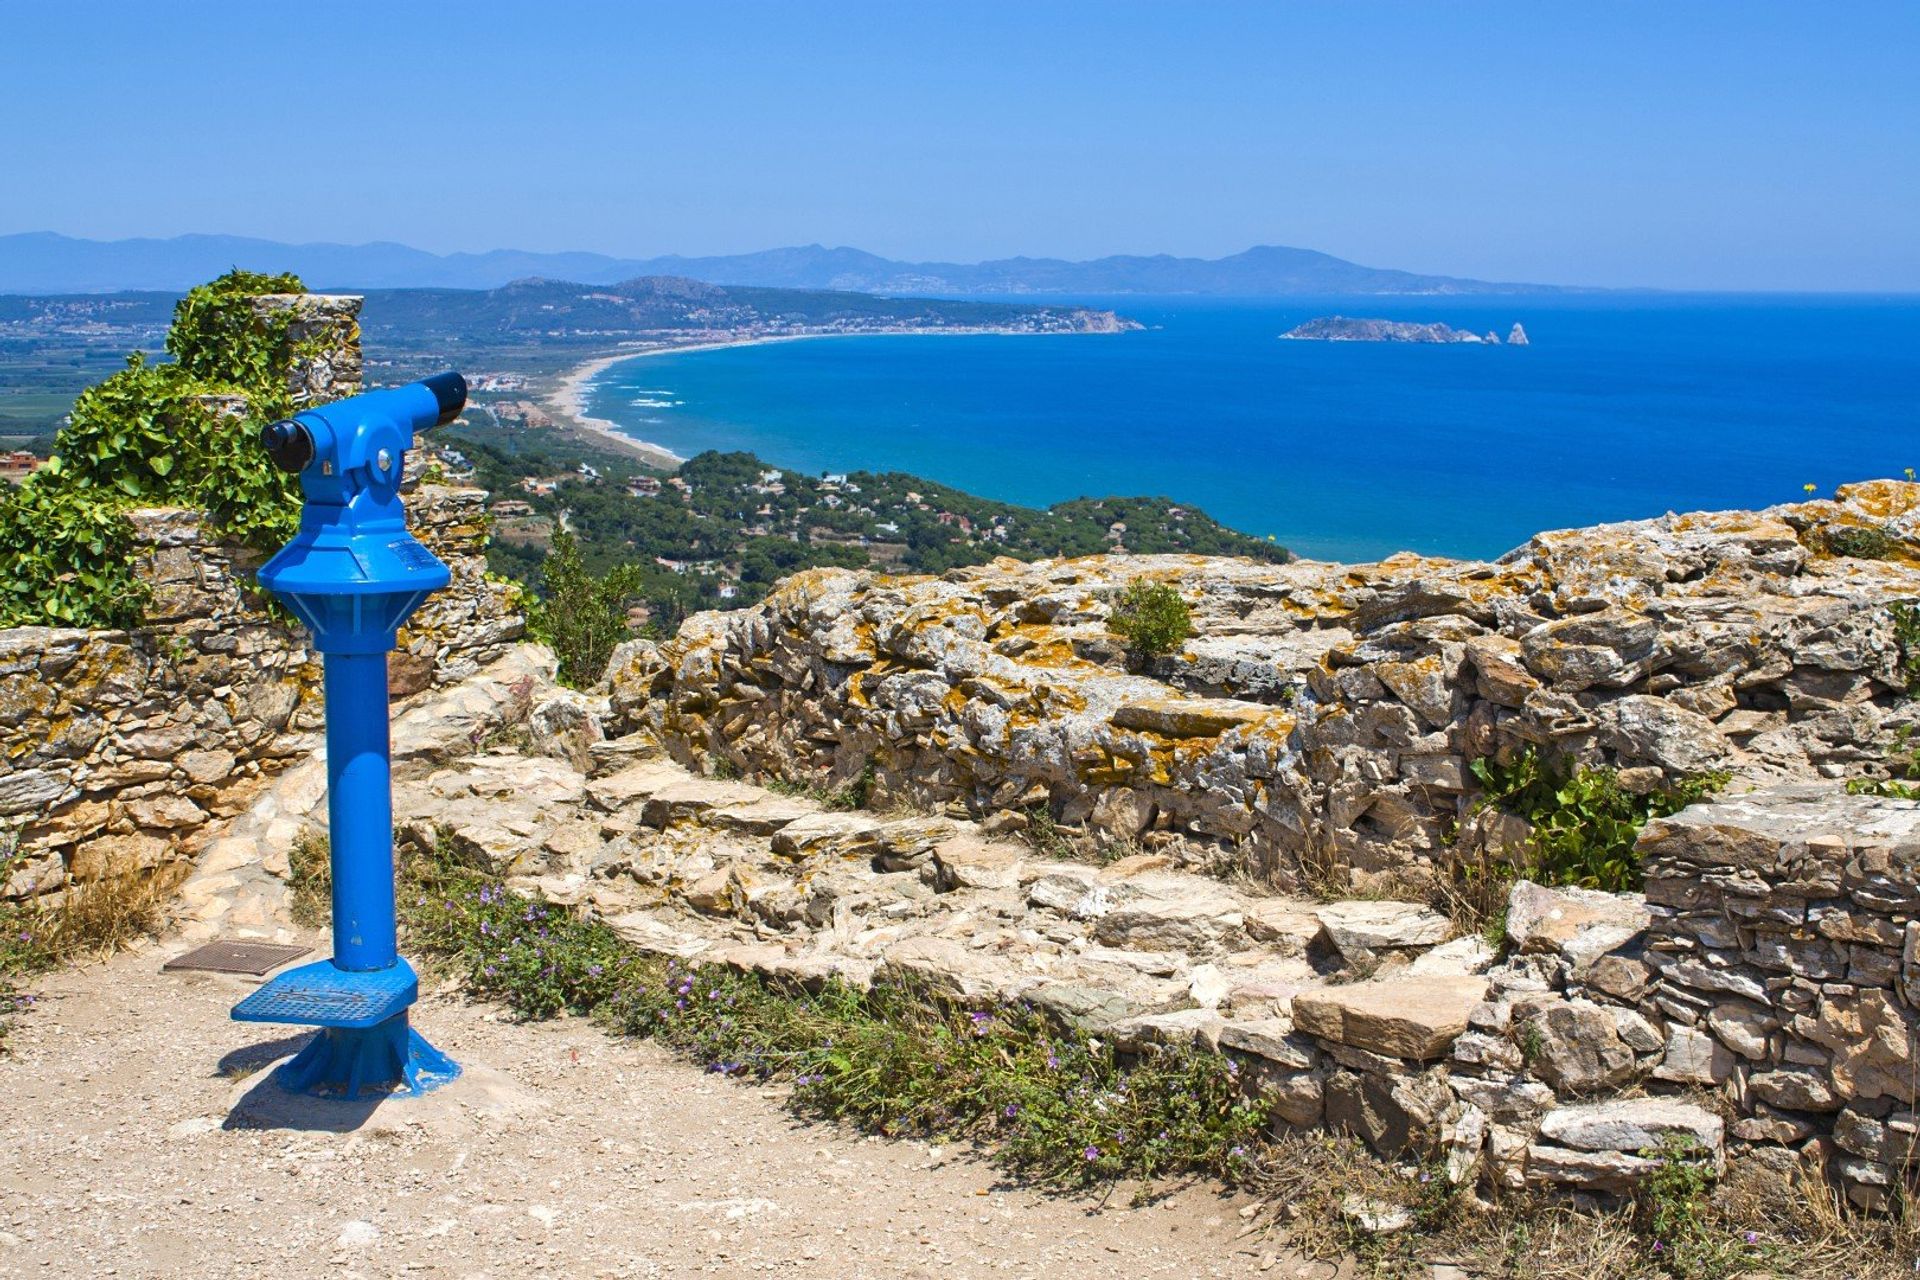 Take in glorious panoramic views across the Mediterranean from hilltop Begur Castle